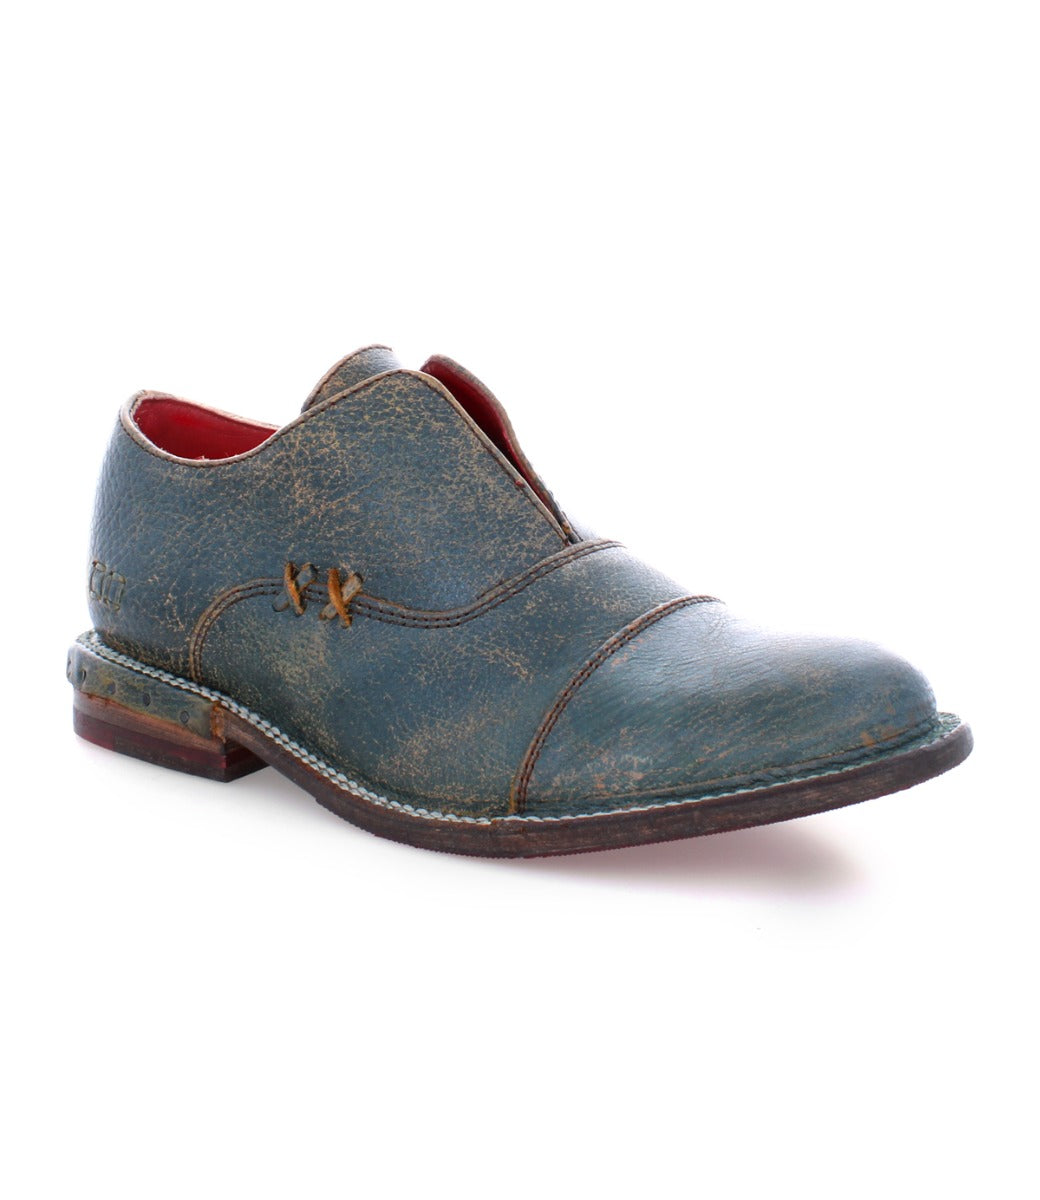 A men's Bed Stu Rose blue leather oxford shoe on a white background.